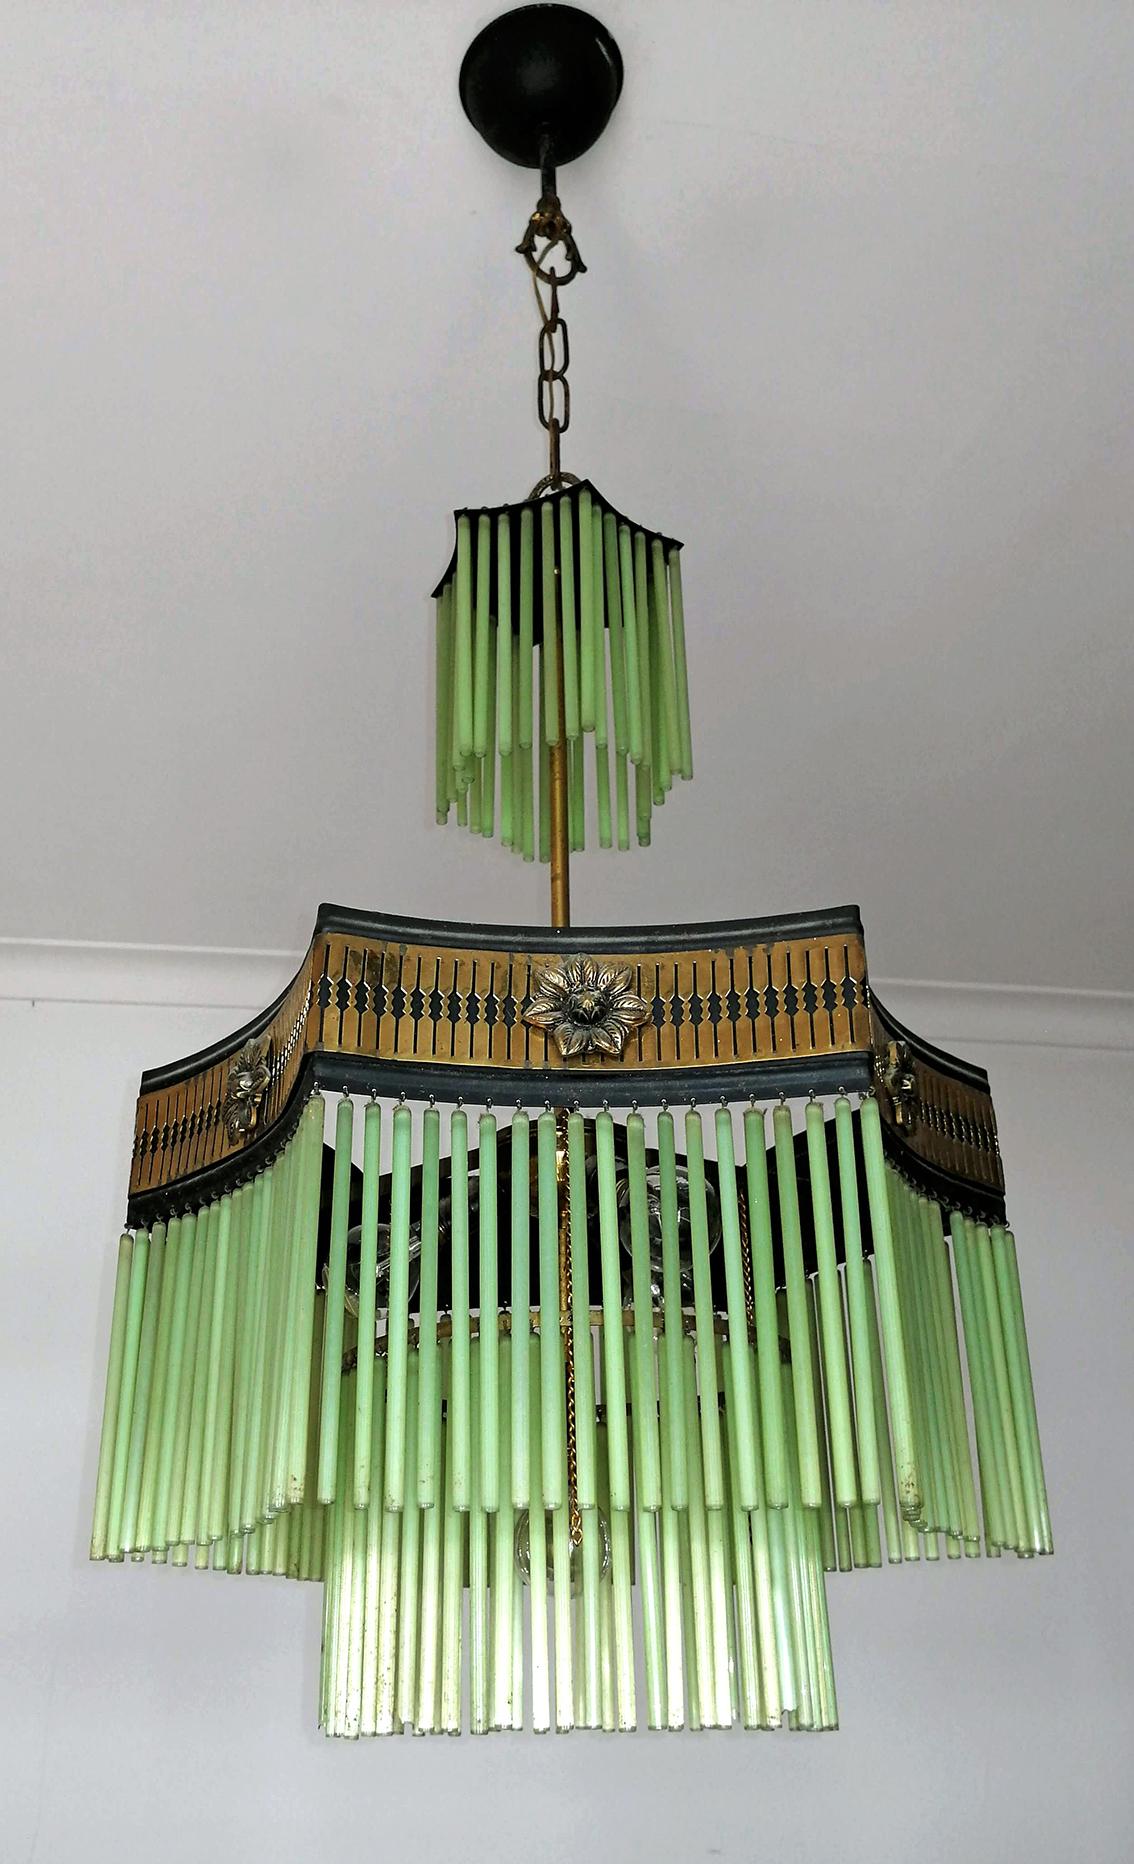 Fabulous French Art Deco & Art Nouveau gilt chandelier with amber glass beads and green glass straws
Measures: Diameter 16 in/ 40 cm
Height: 38 in (25,6 in + 12 in chain)/ 95 cm (65 cm + 30 cm chain)
Weight: 5 lb/ 4 Kg
Four light bulbs E14/ Good